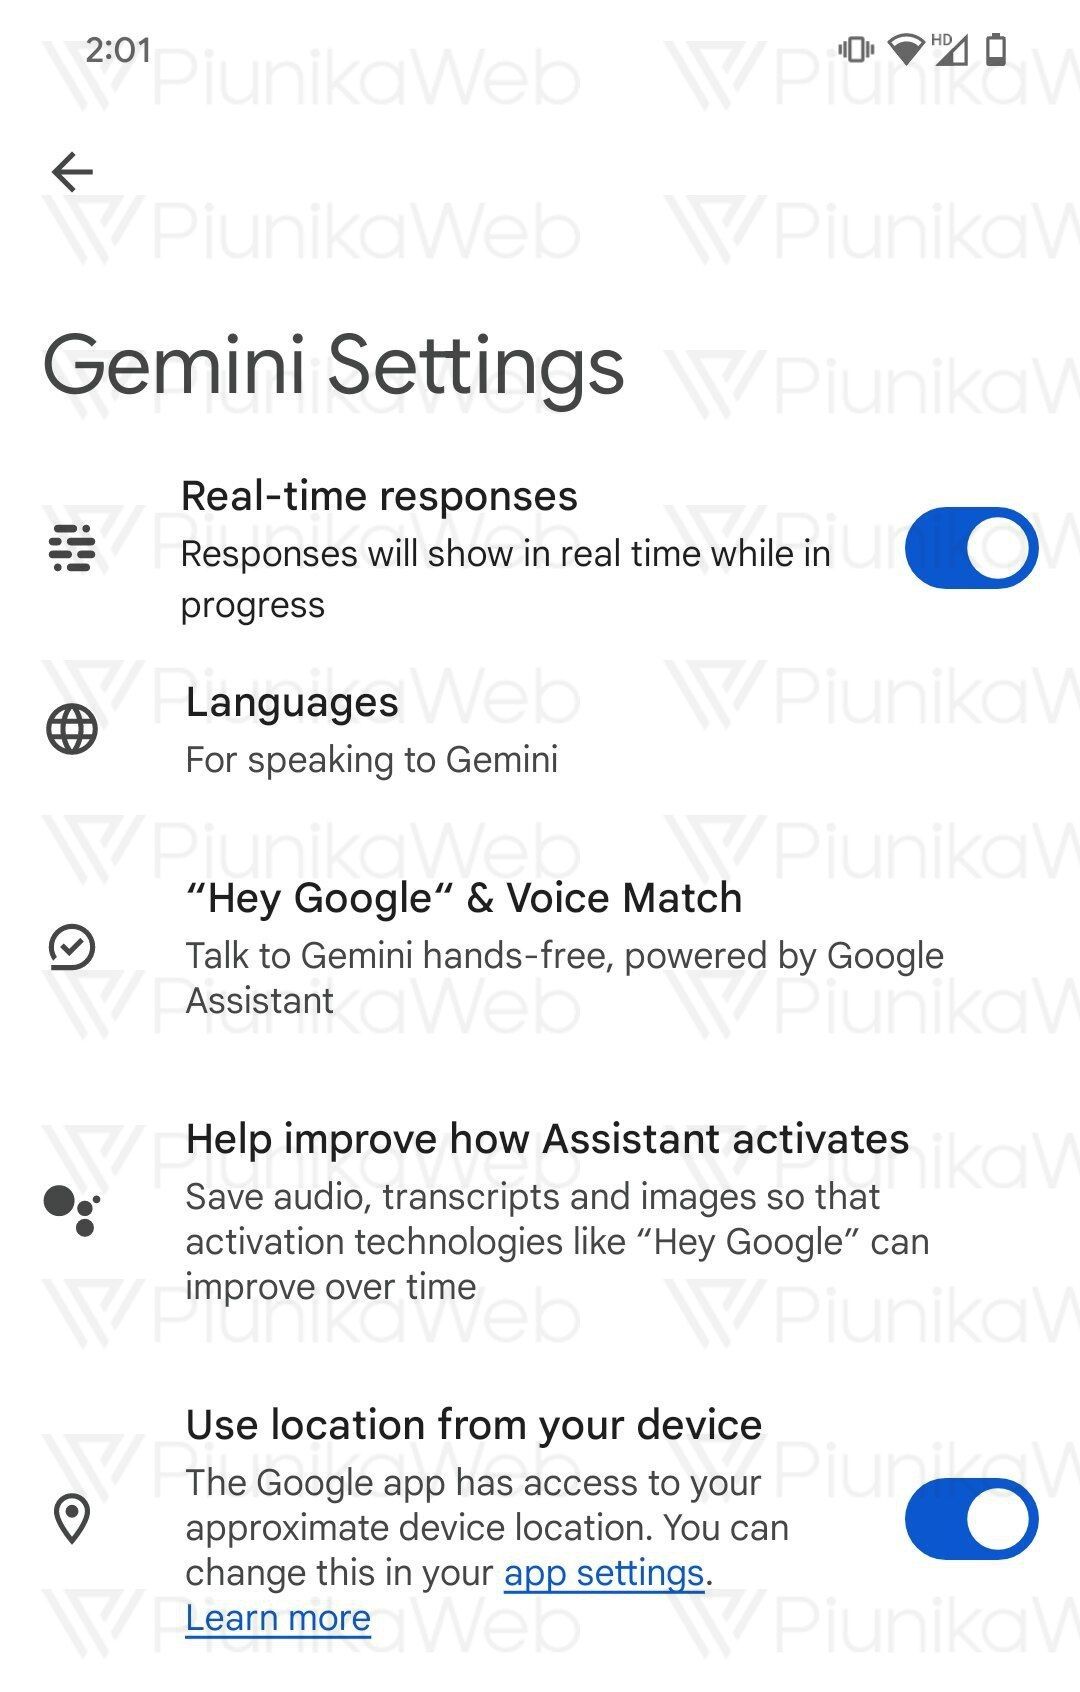 google Gemini app on Android produces real-time responses